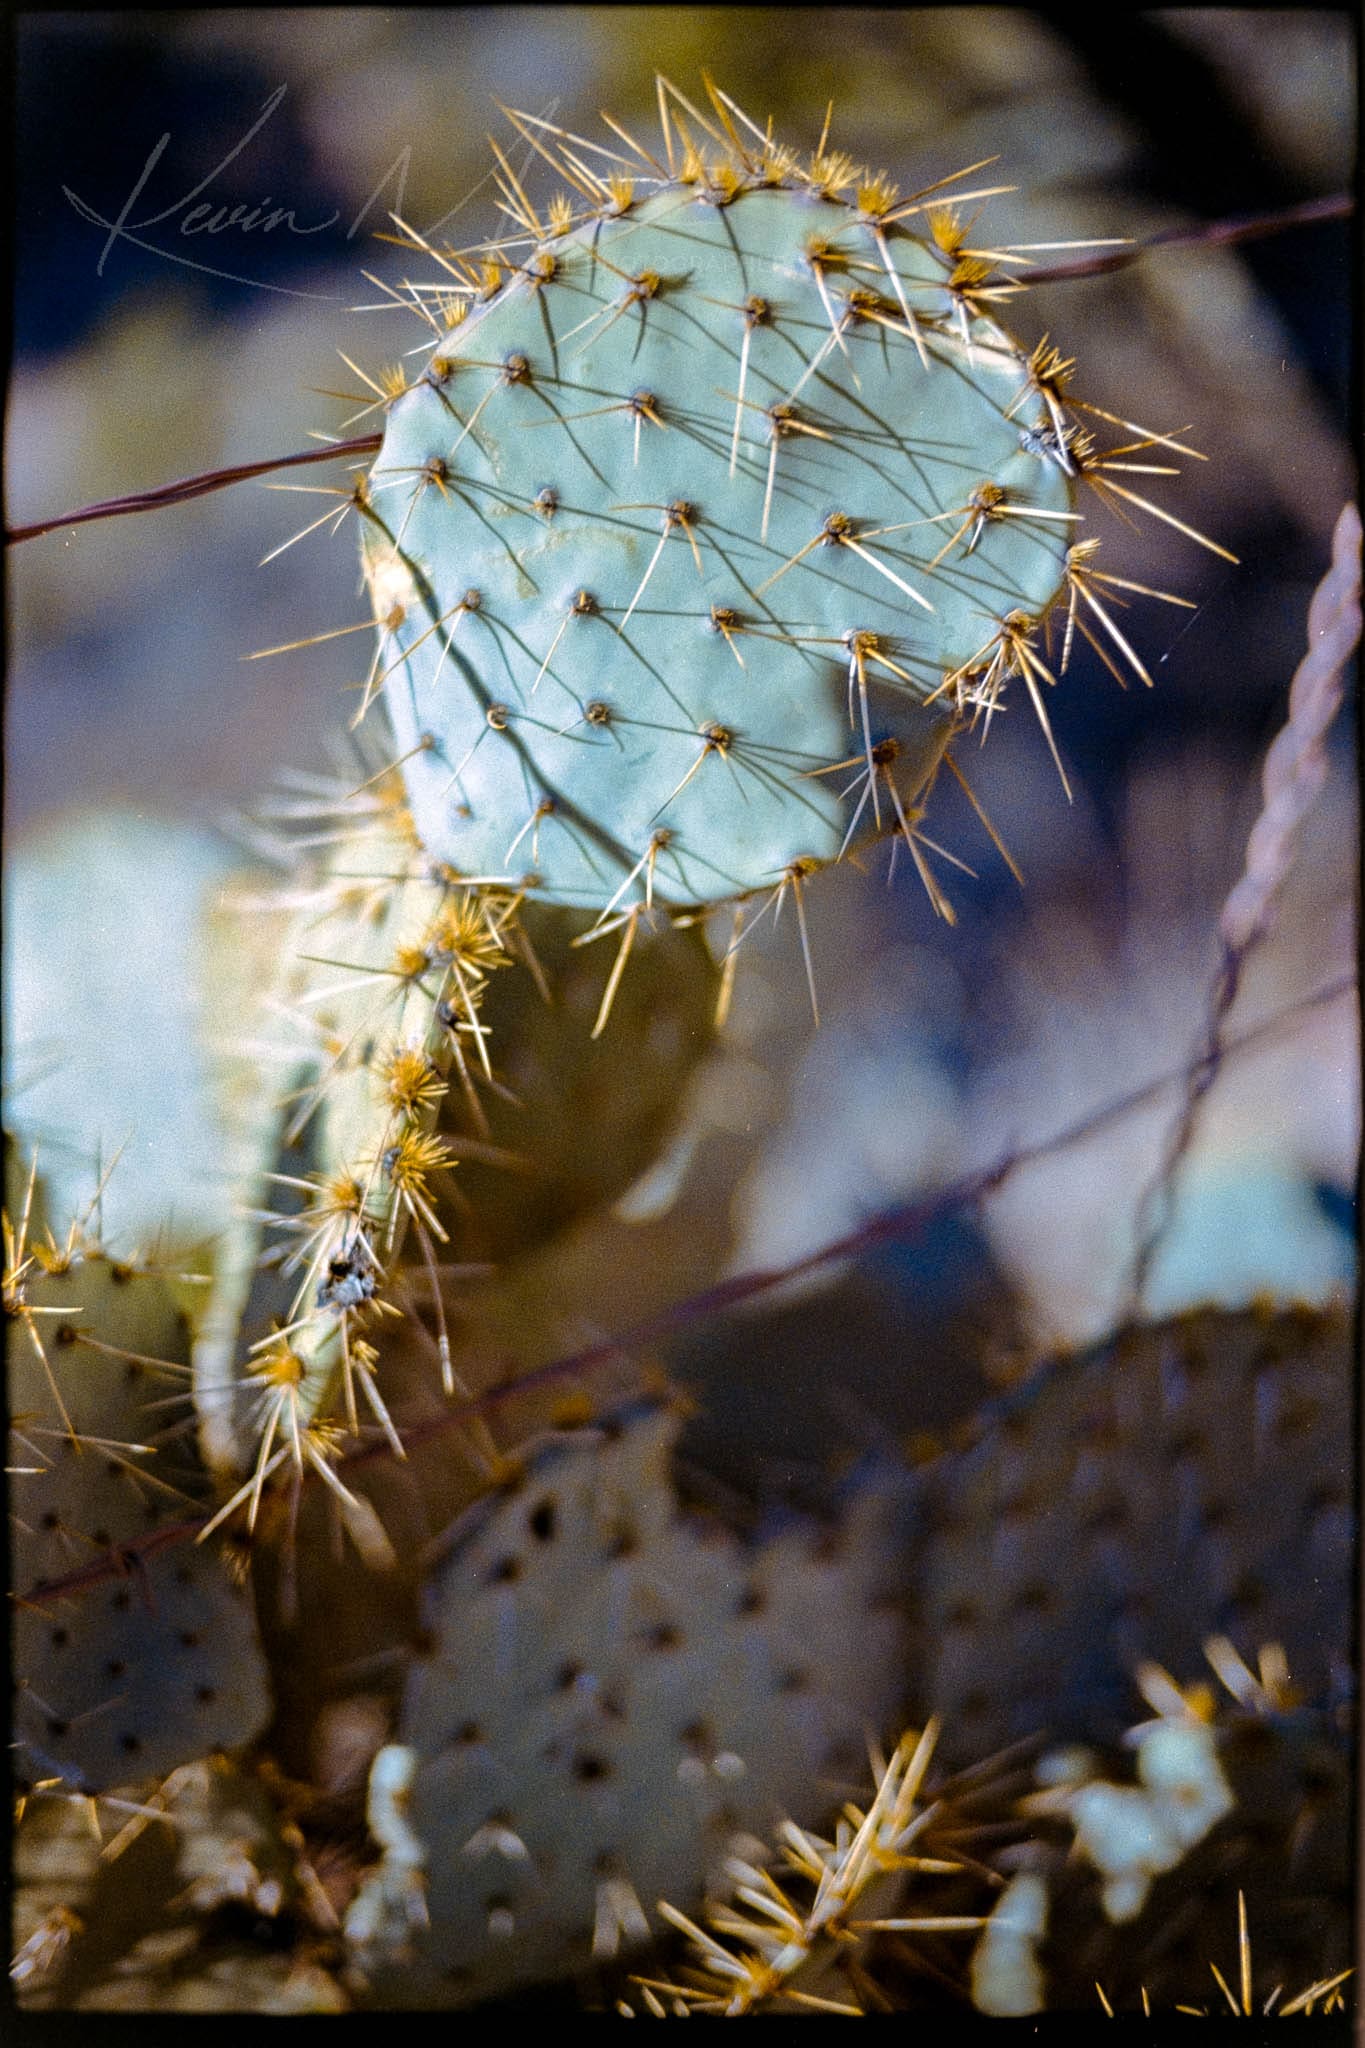 Young prickly pear cactus pad with golden spines, highlighted by warm sunlight in a desert ecosystem.